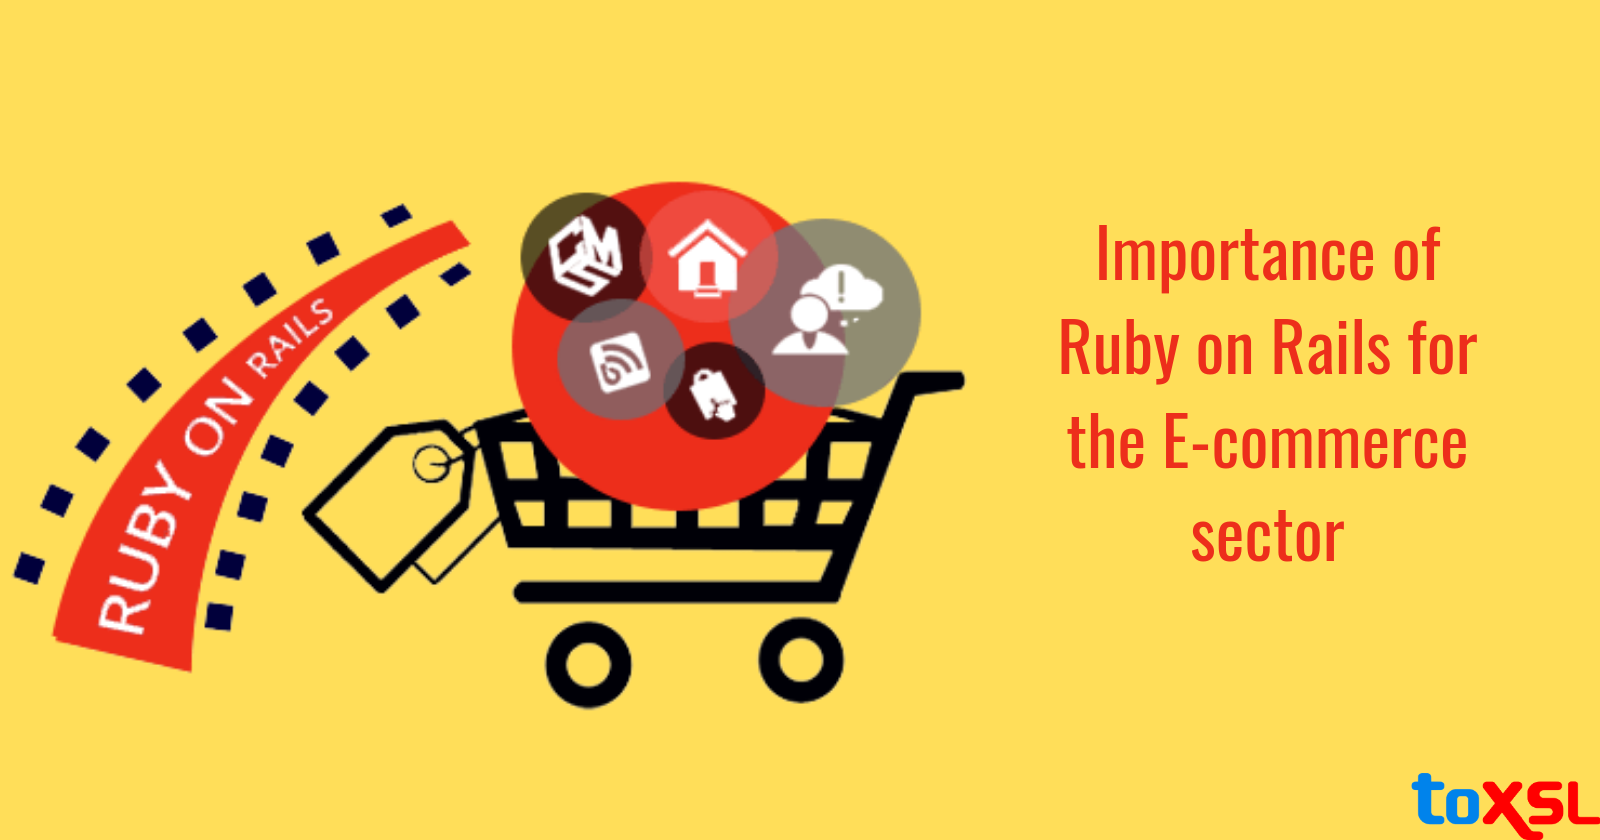 Top Reasons To Use RoR For E-commerce Development